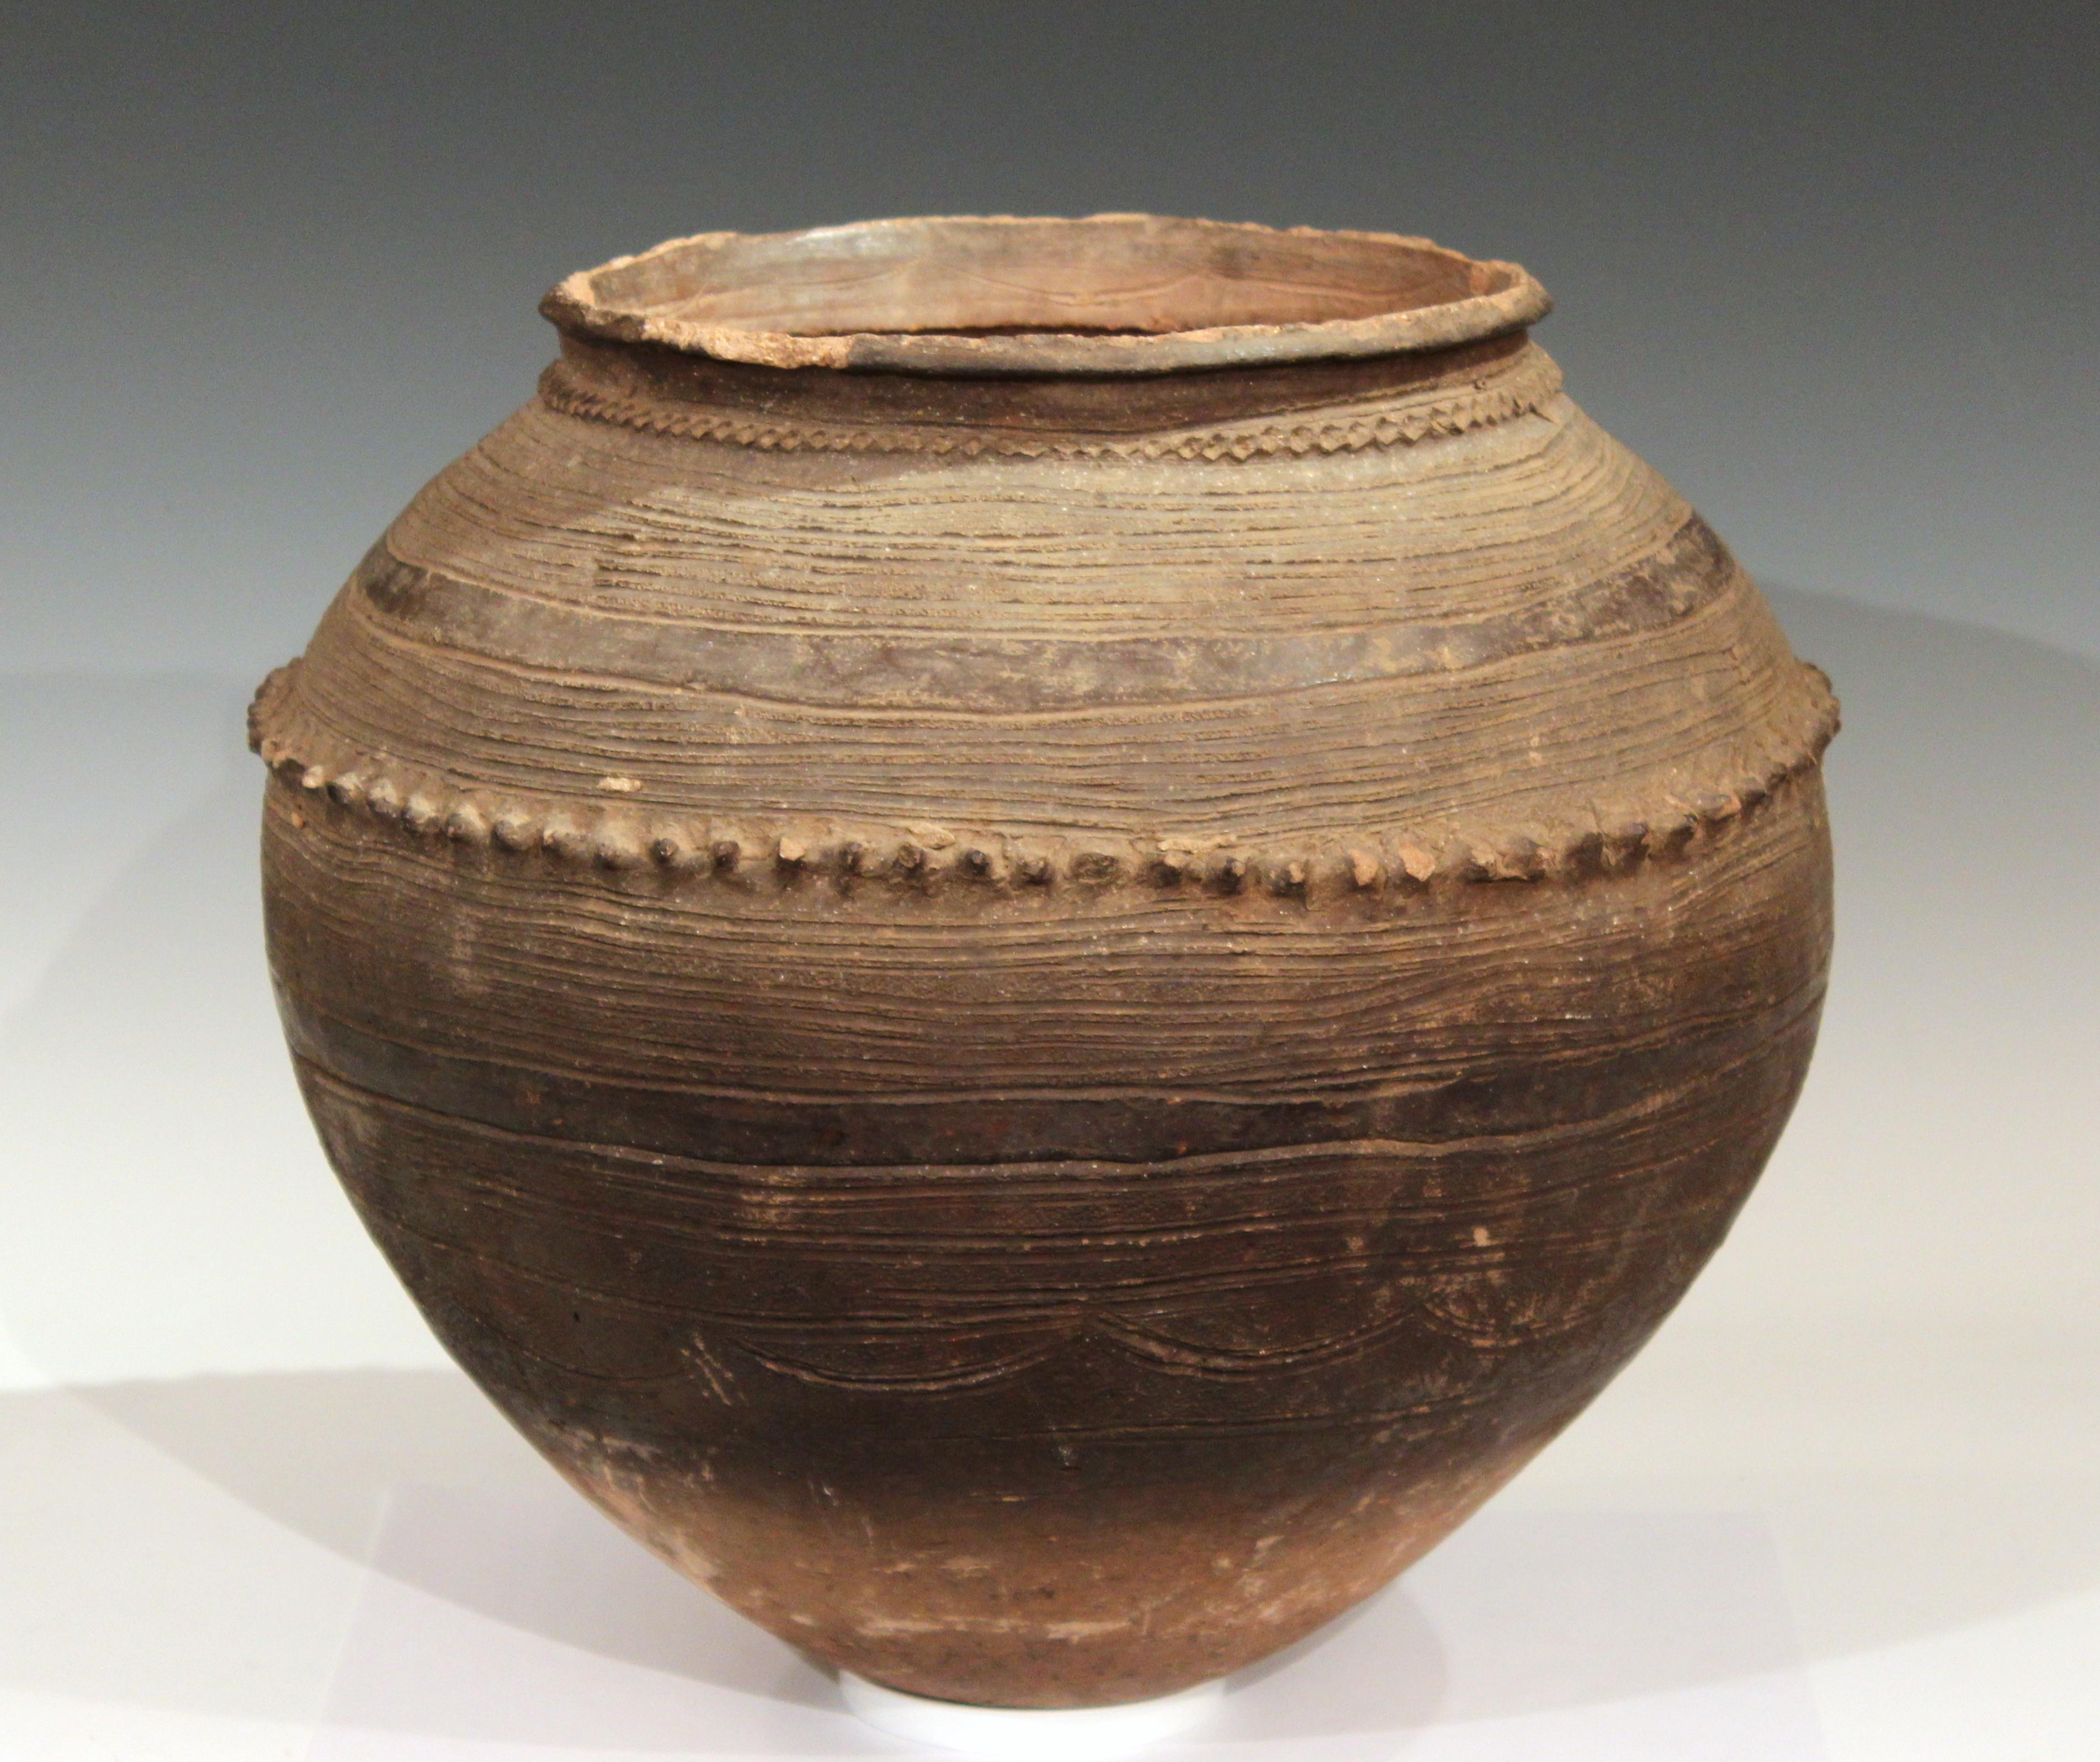 Big old Nigerian coiled terracotta round bottomed storage jar decorated all-over with incised horizontal bands and geometric designs and applied bands at the collar and shoulder, circa early to mid-20th century. Measures: 15